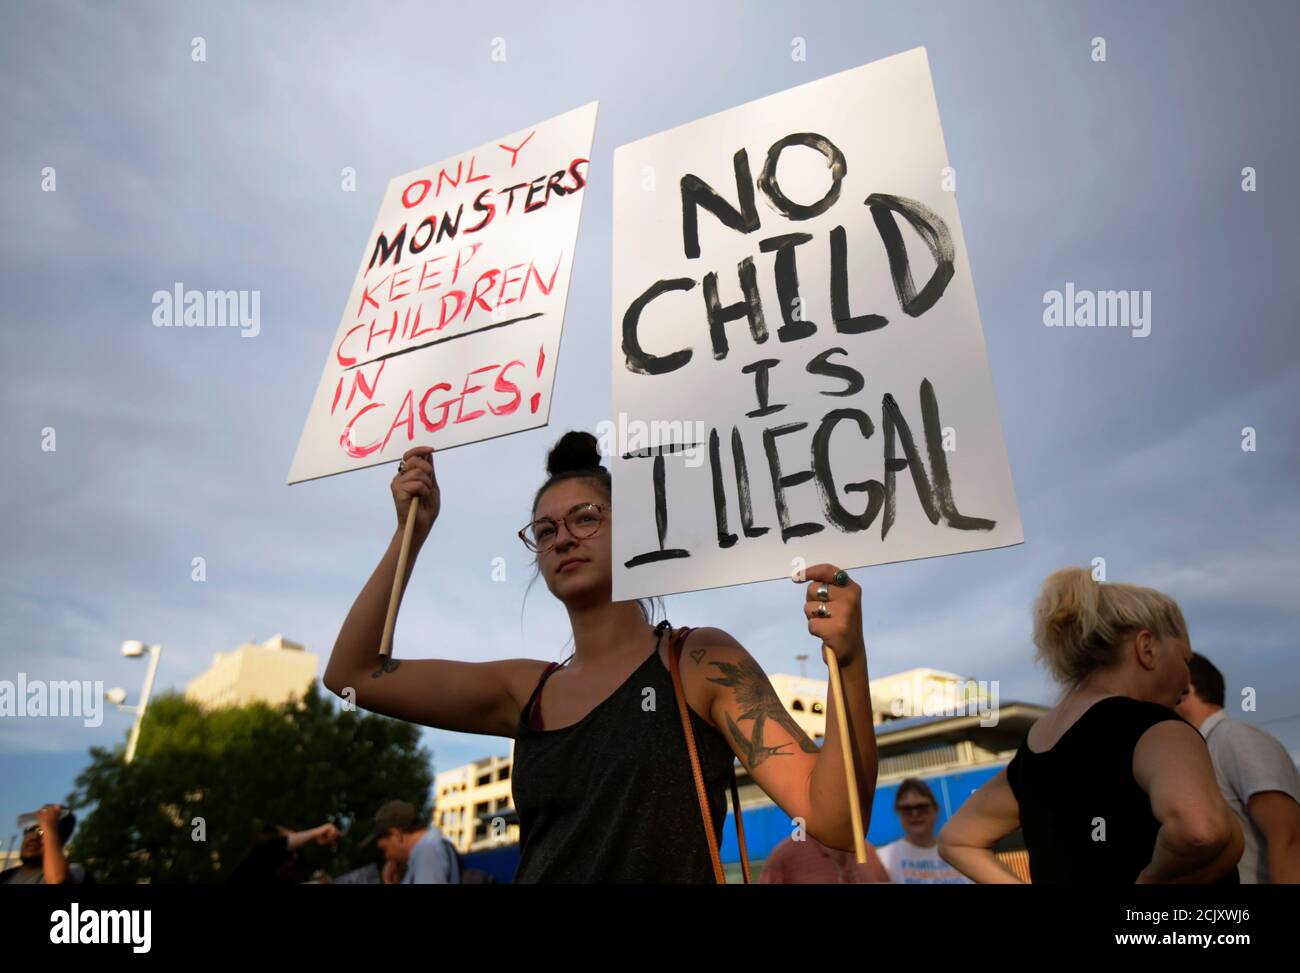 A protester holds placards during an immigration rights rally at Cleveland Square Park in El Paso, Texas, U.S. July 12, 2019. REUTERS/Daniel Becerril Stock Photo